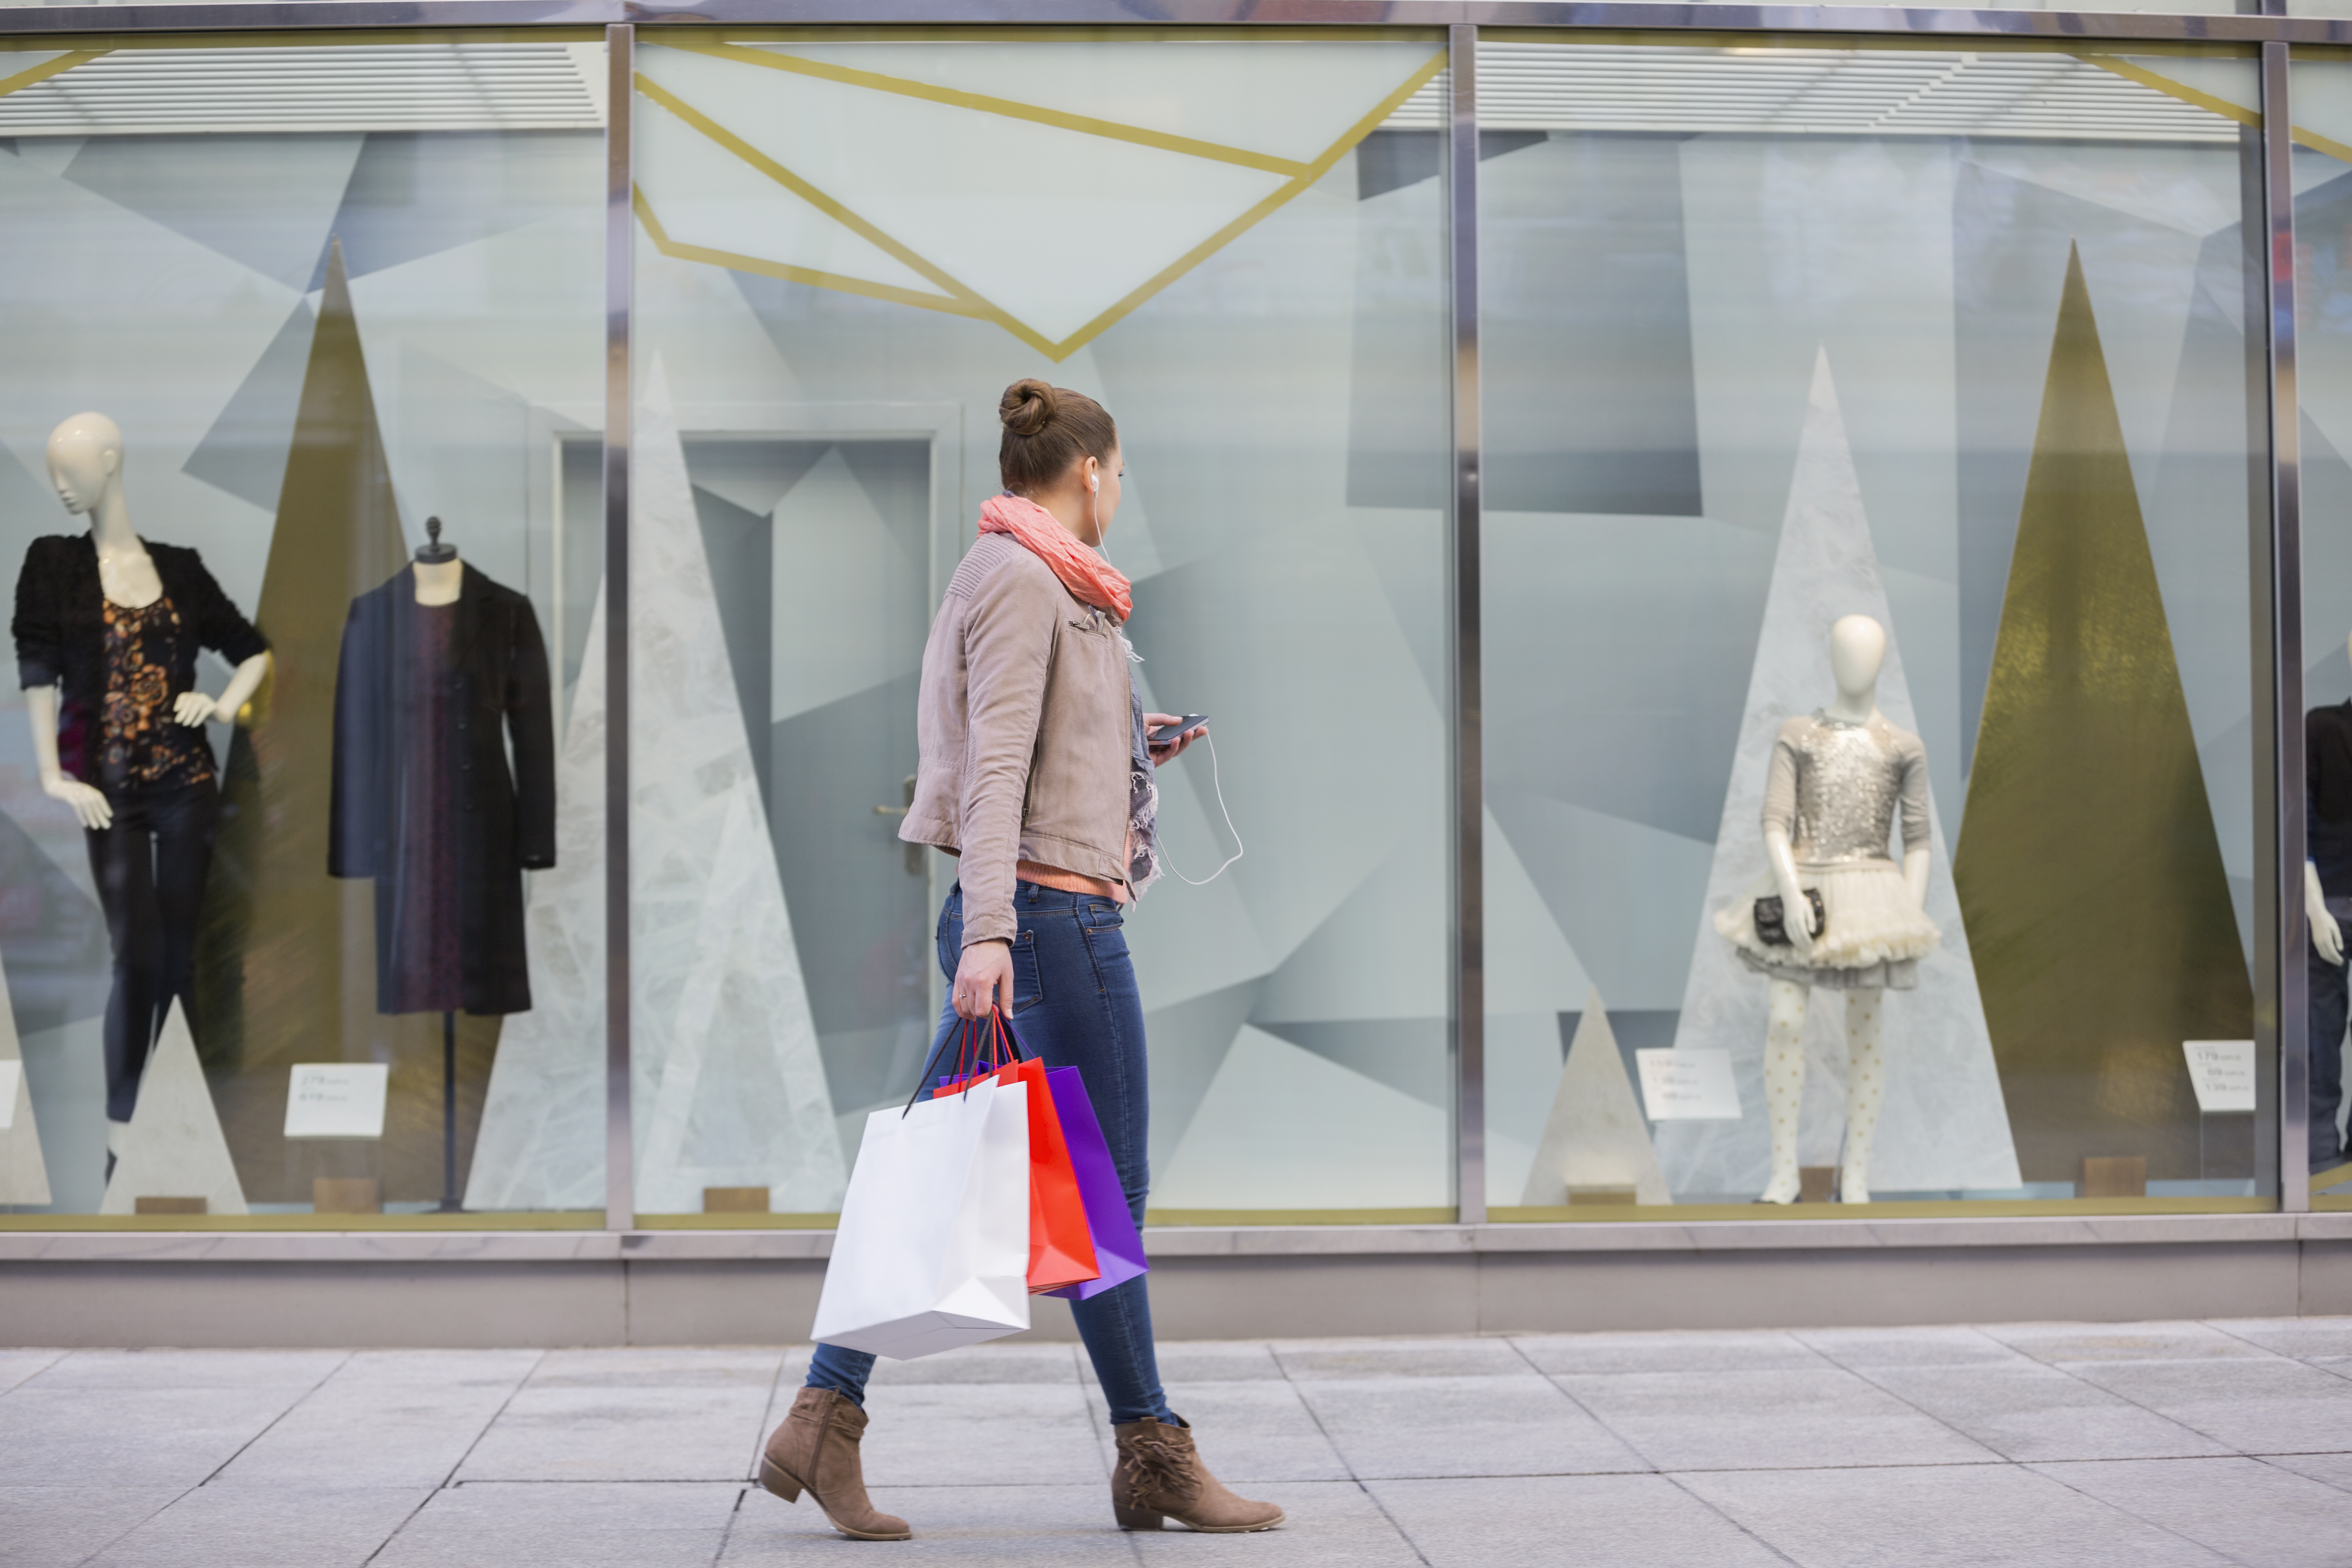 Profile shot of young woman with shopping bags looking at window display